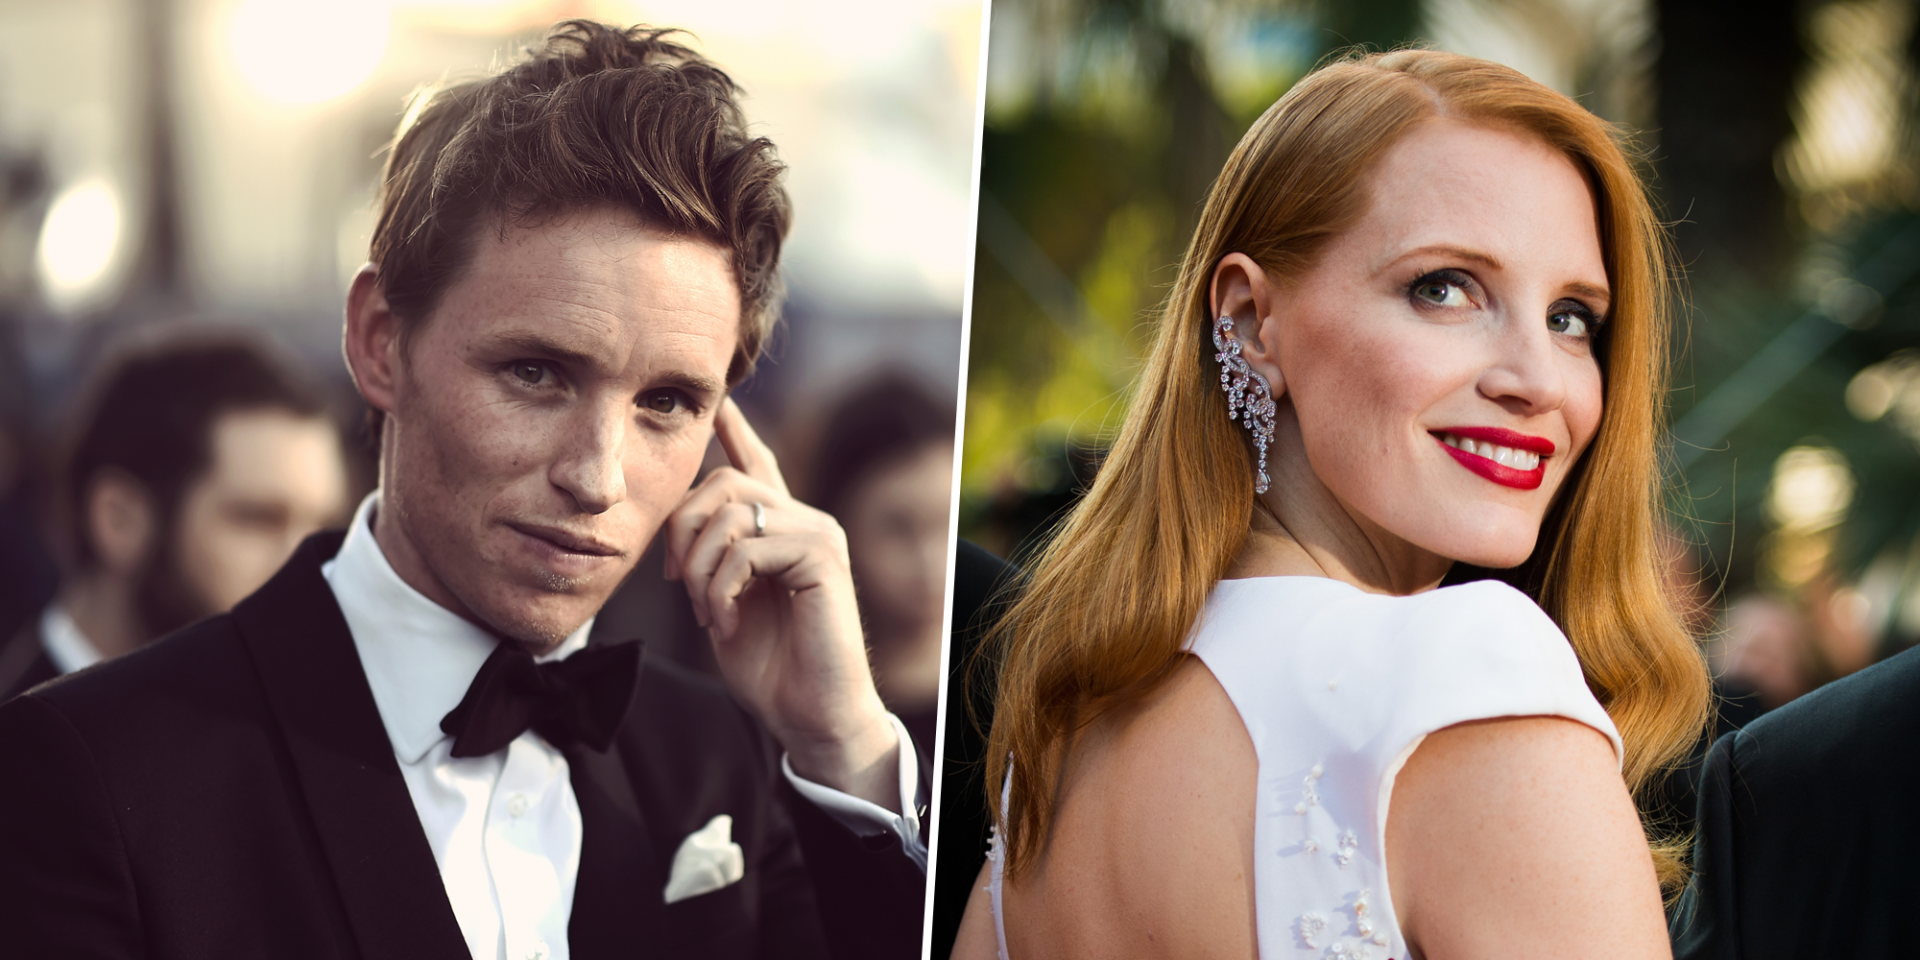 ‘The Good Nurse’: Eddie Redmayne and other Casts, Production Status